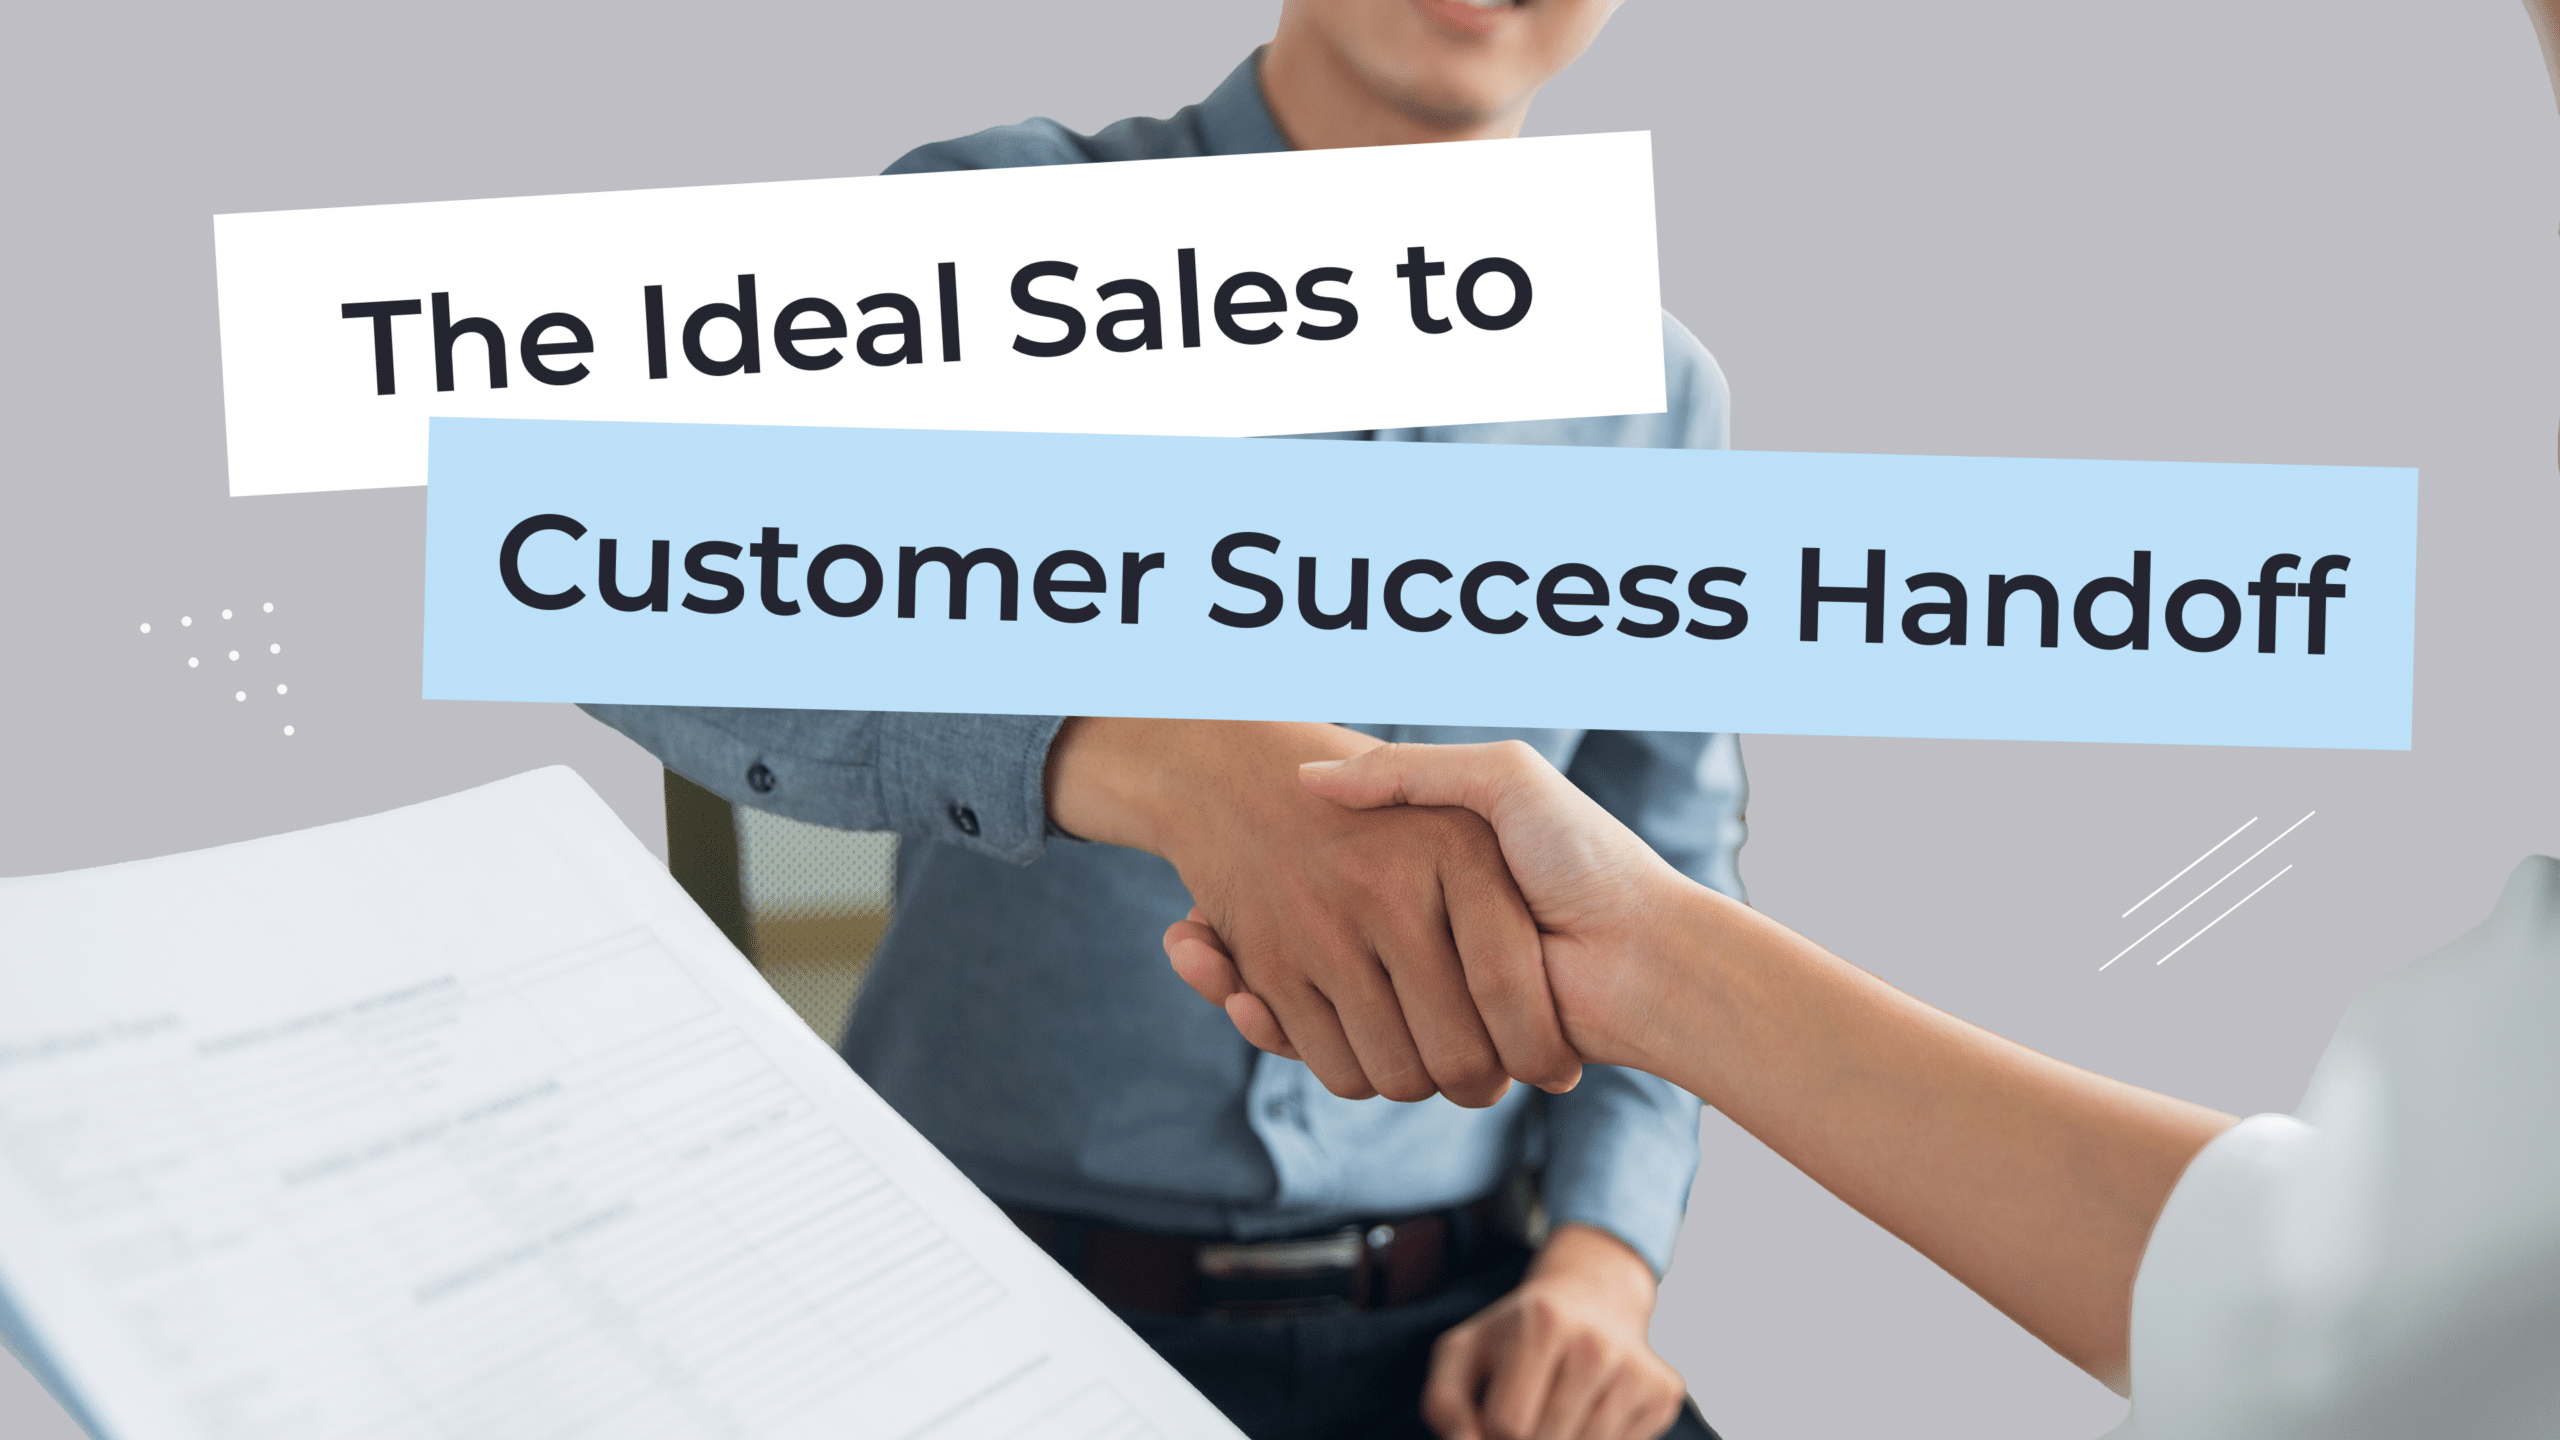 The Ideal Sales to Customer Success Handoff